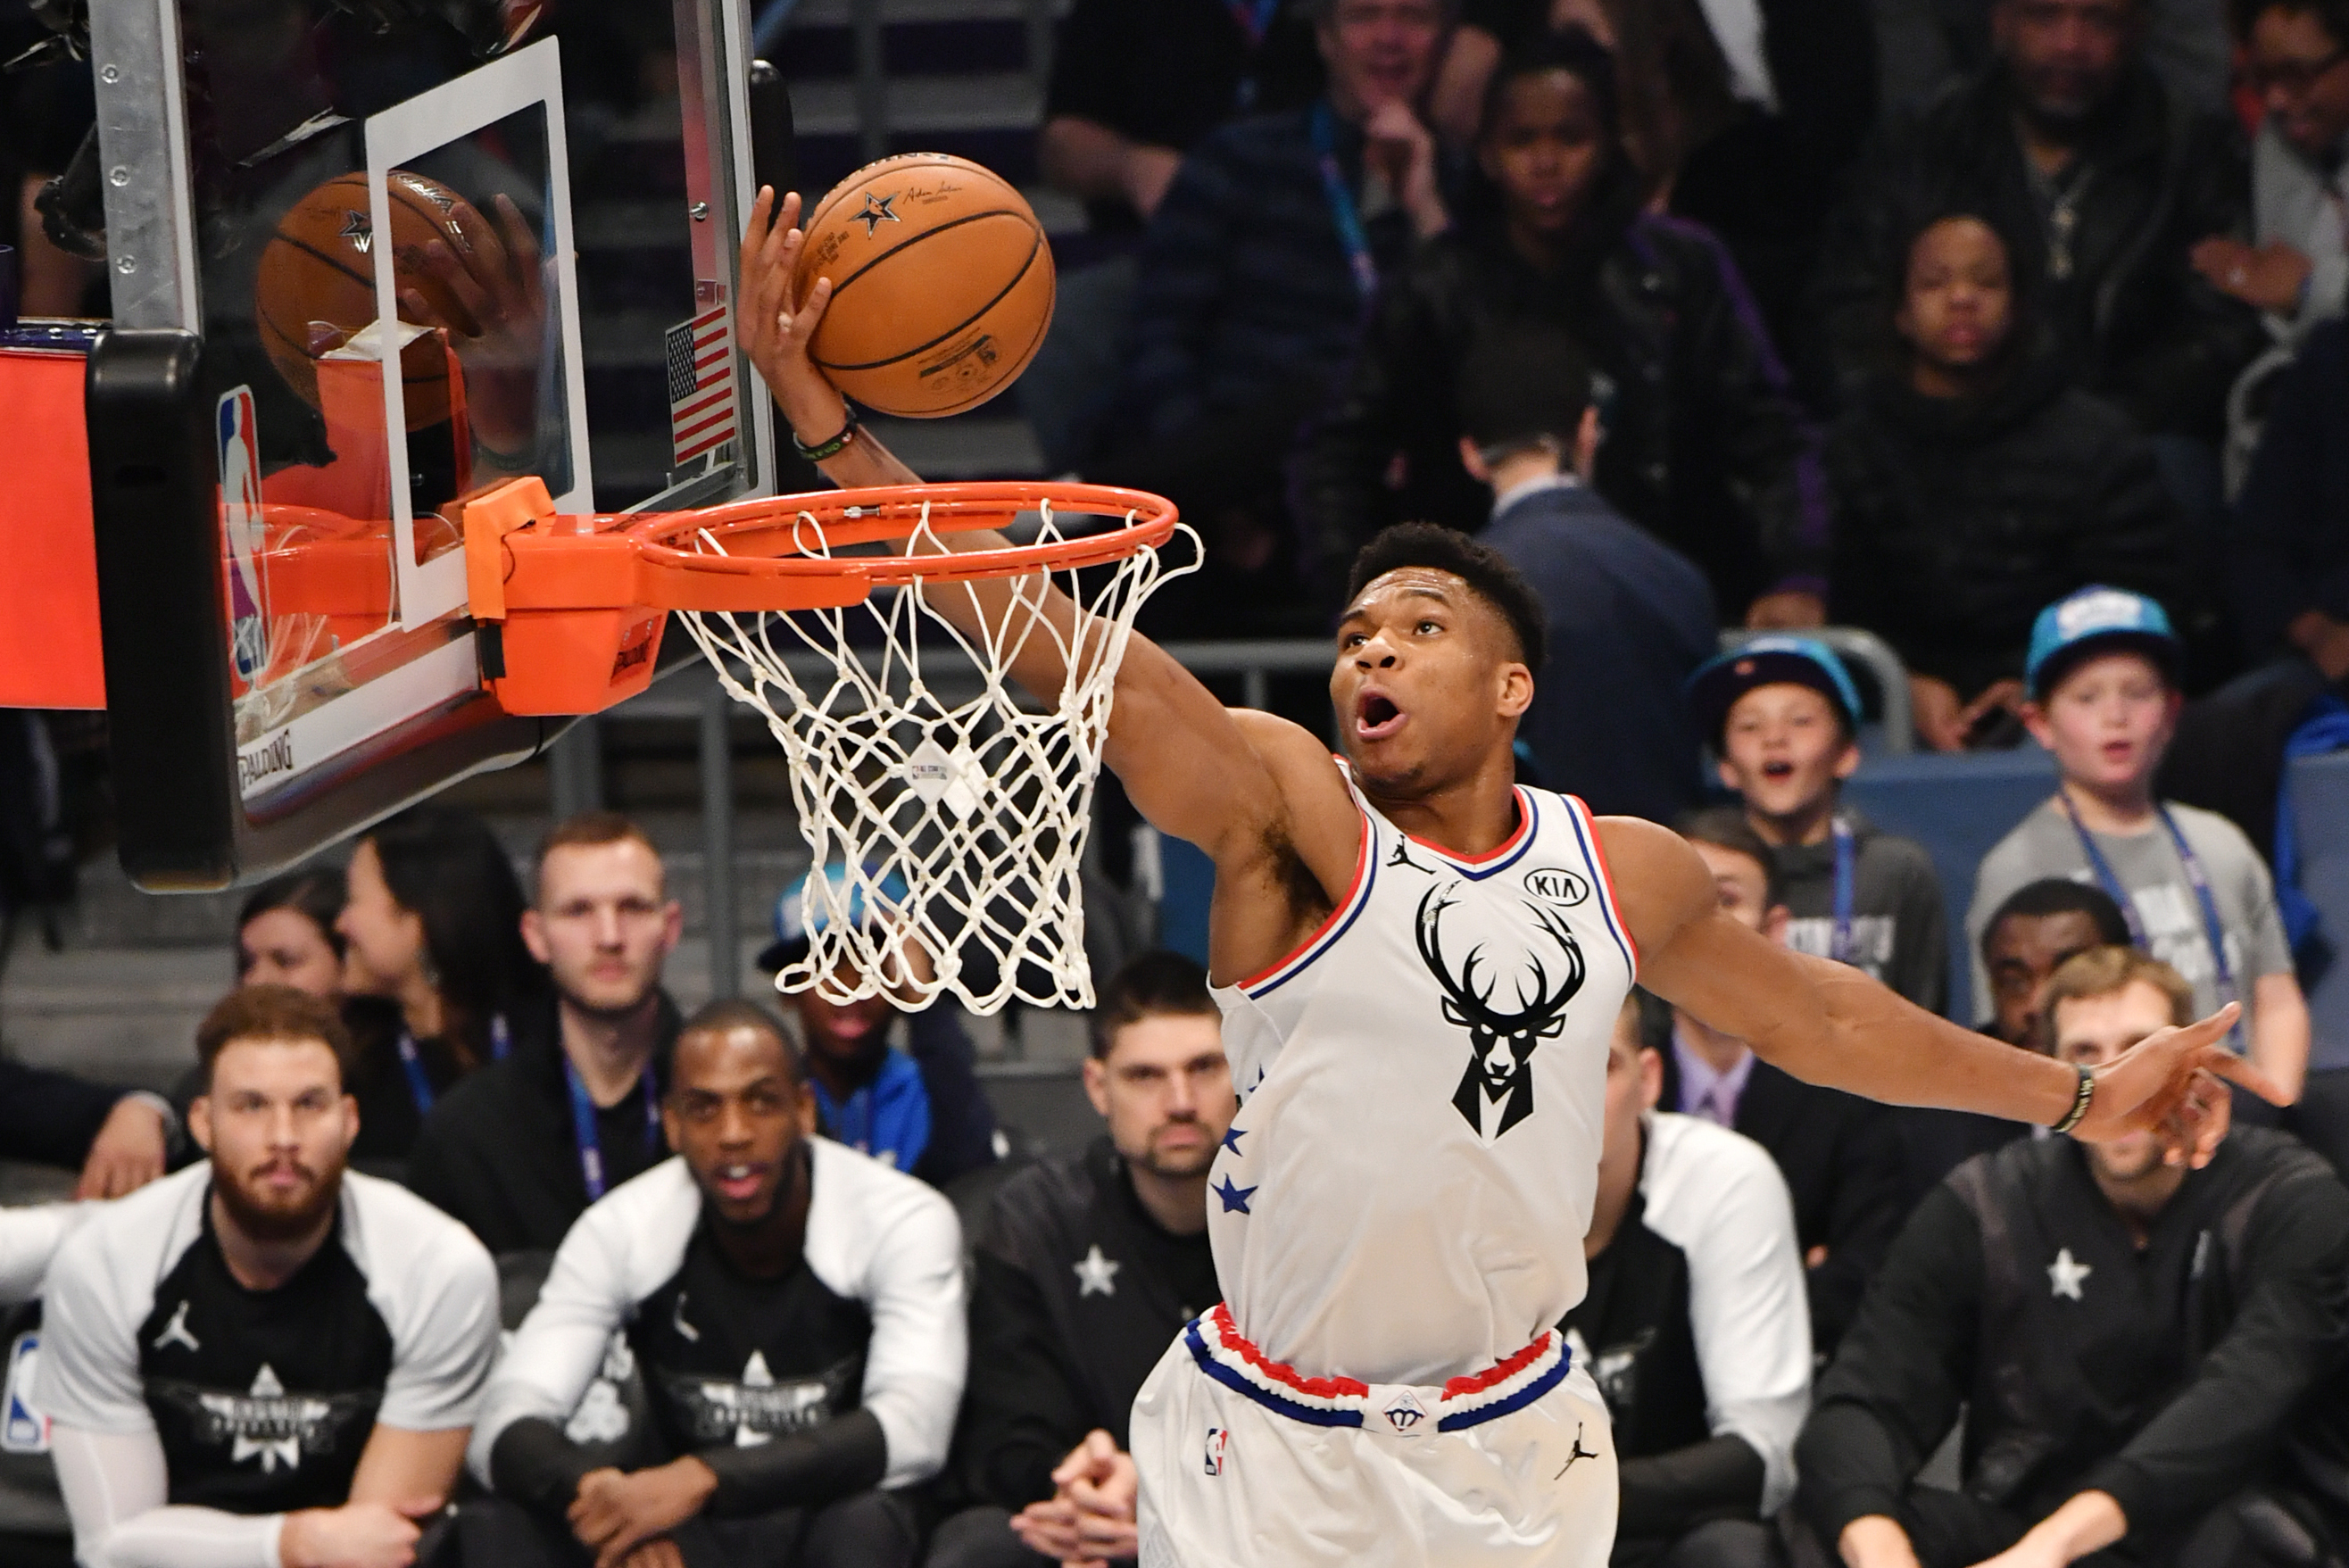 Giannis Antetokounmpo regrets missing a highlight dunk over Daniel